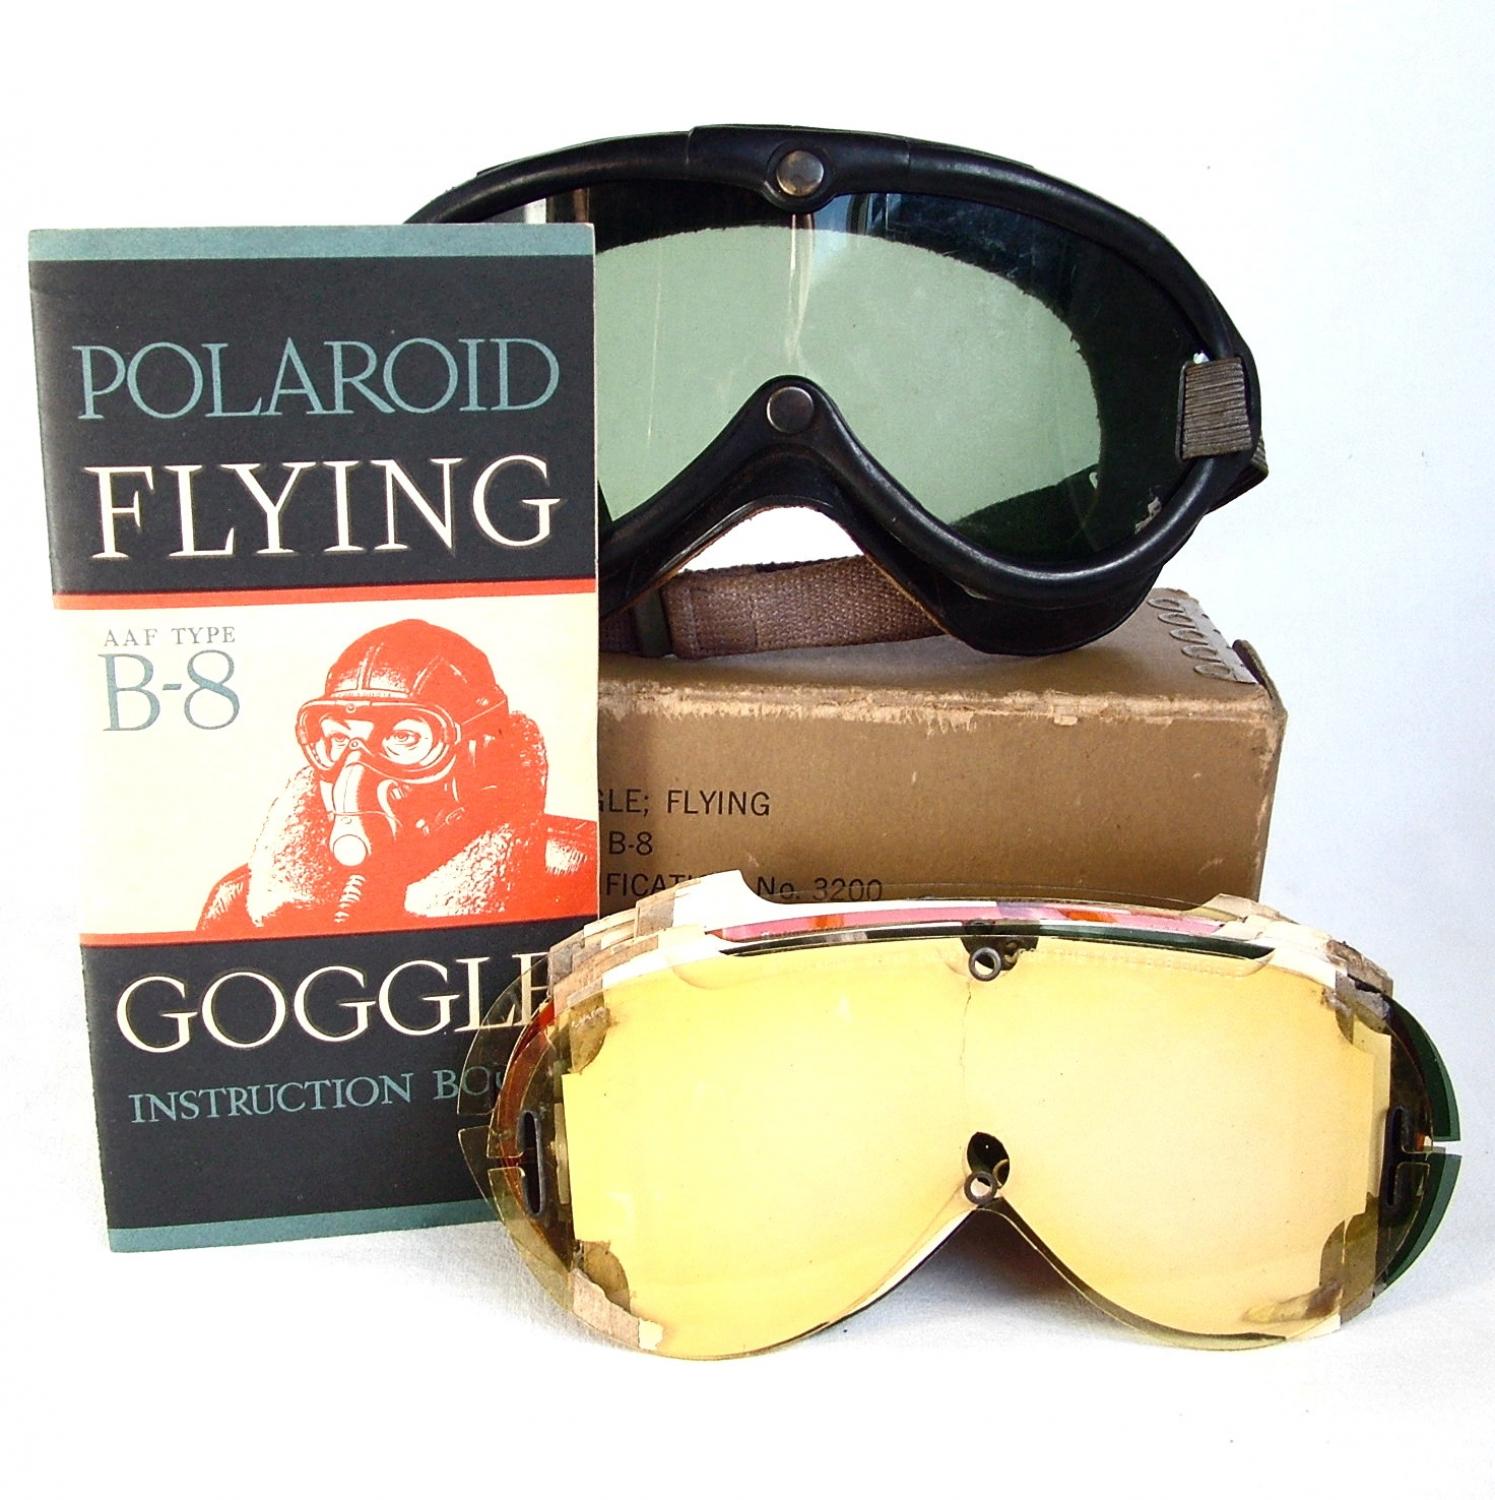 USAAF Type B-8 Flying Goggles, Boxed